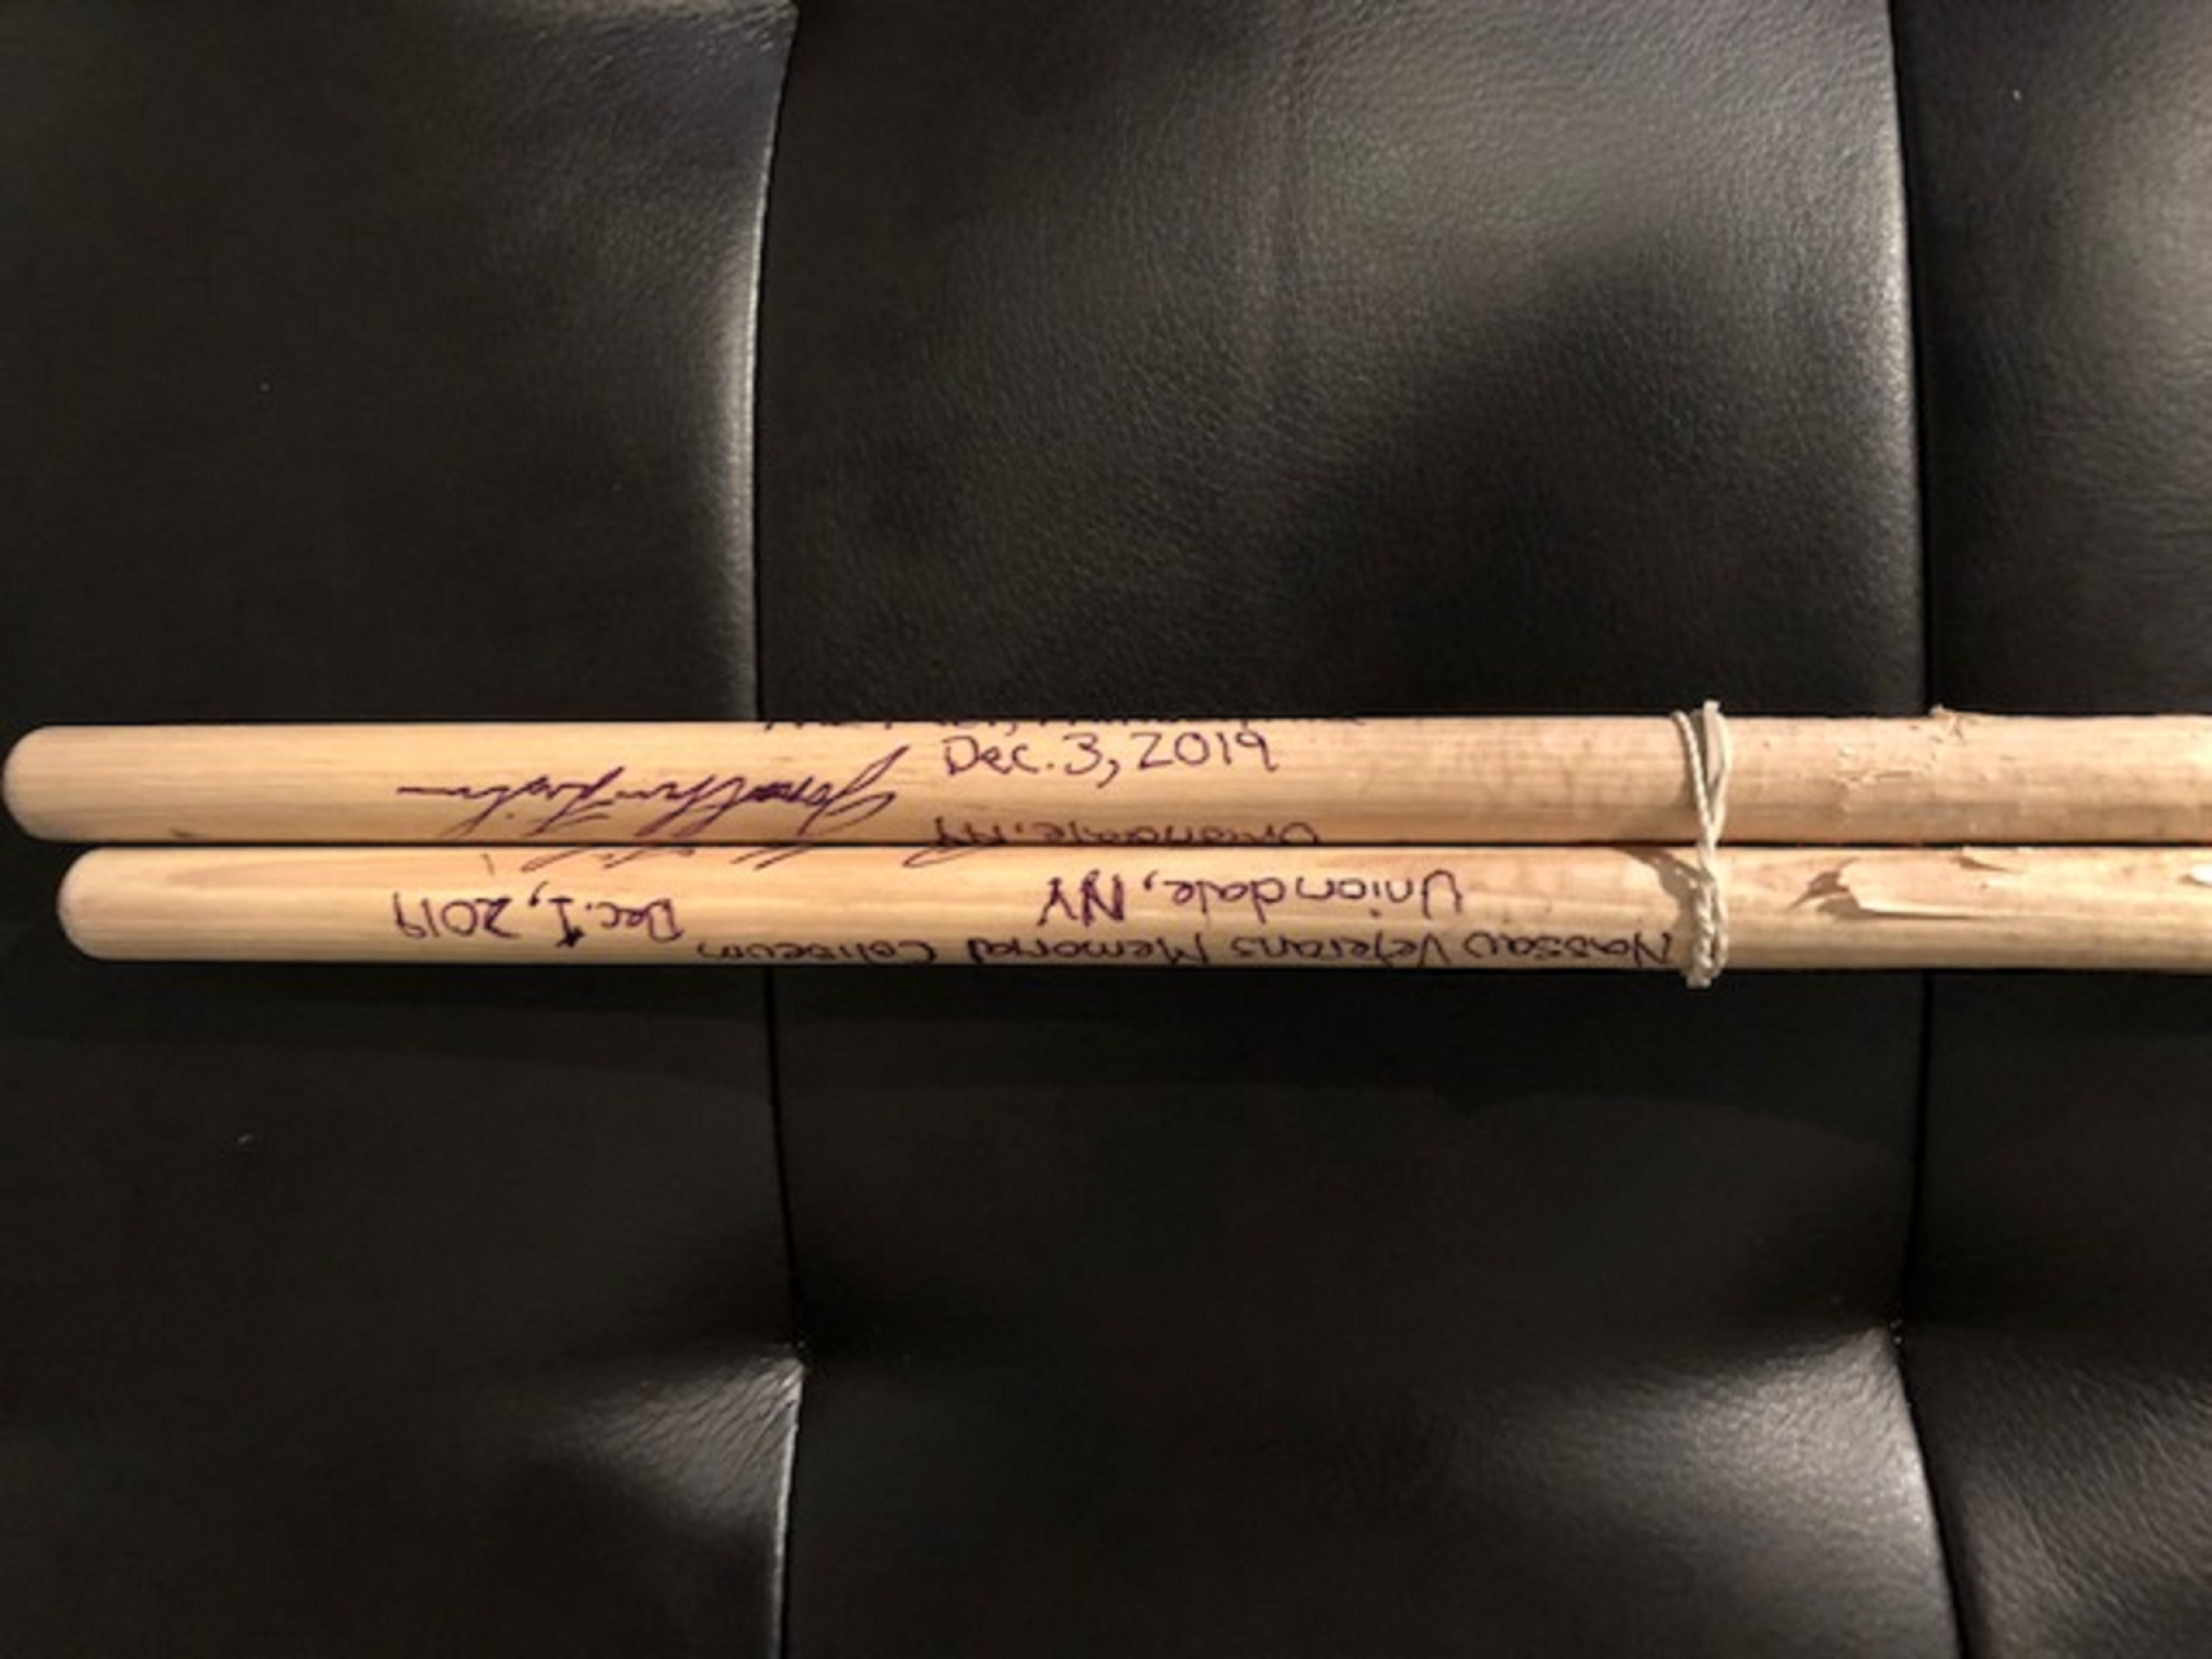 Mimi Fishman Foundation Auction features Phish Signed Drumsticks/Heads - 2019/2020